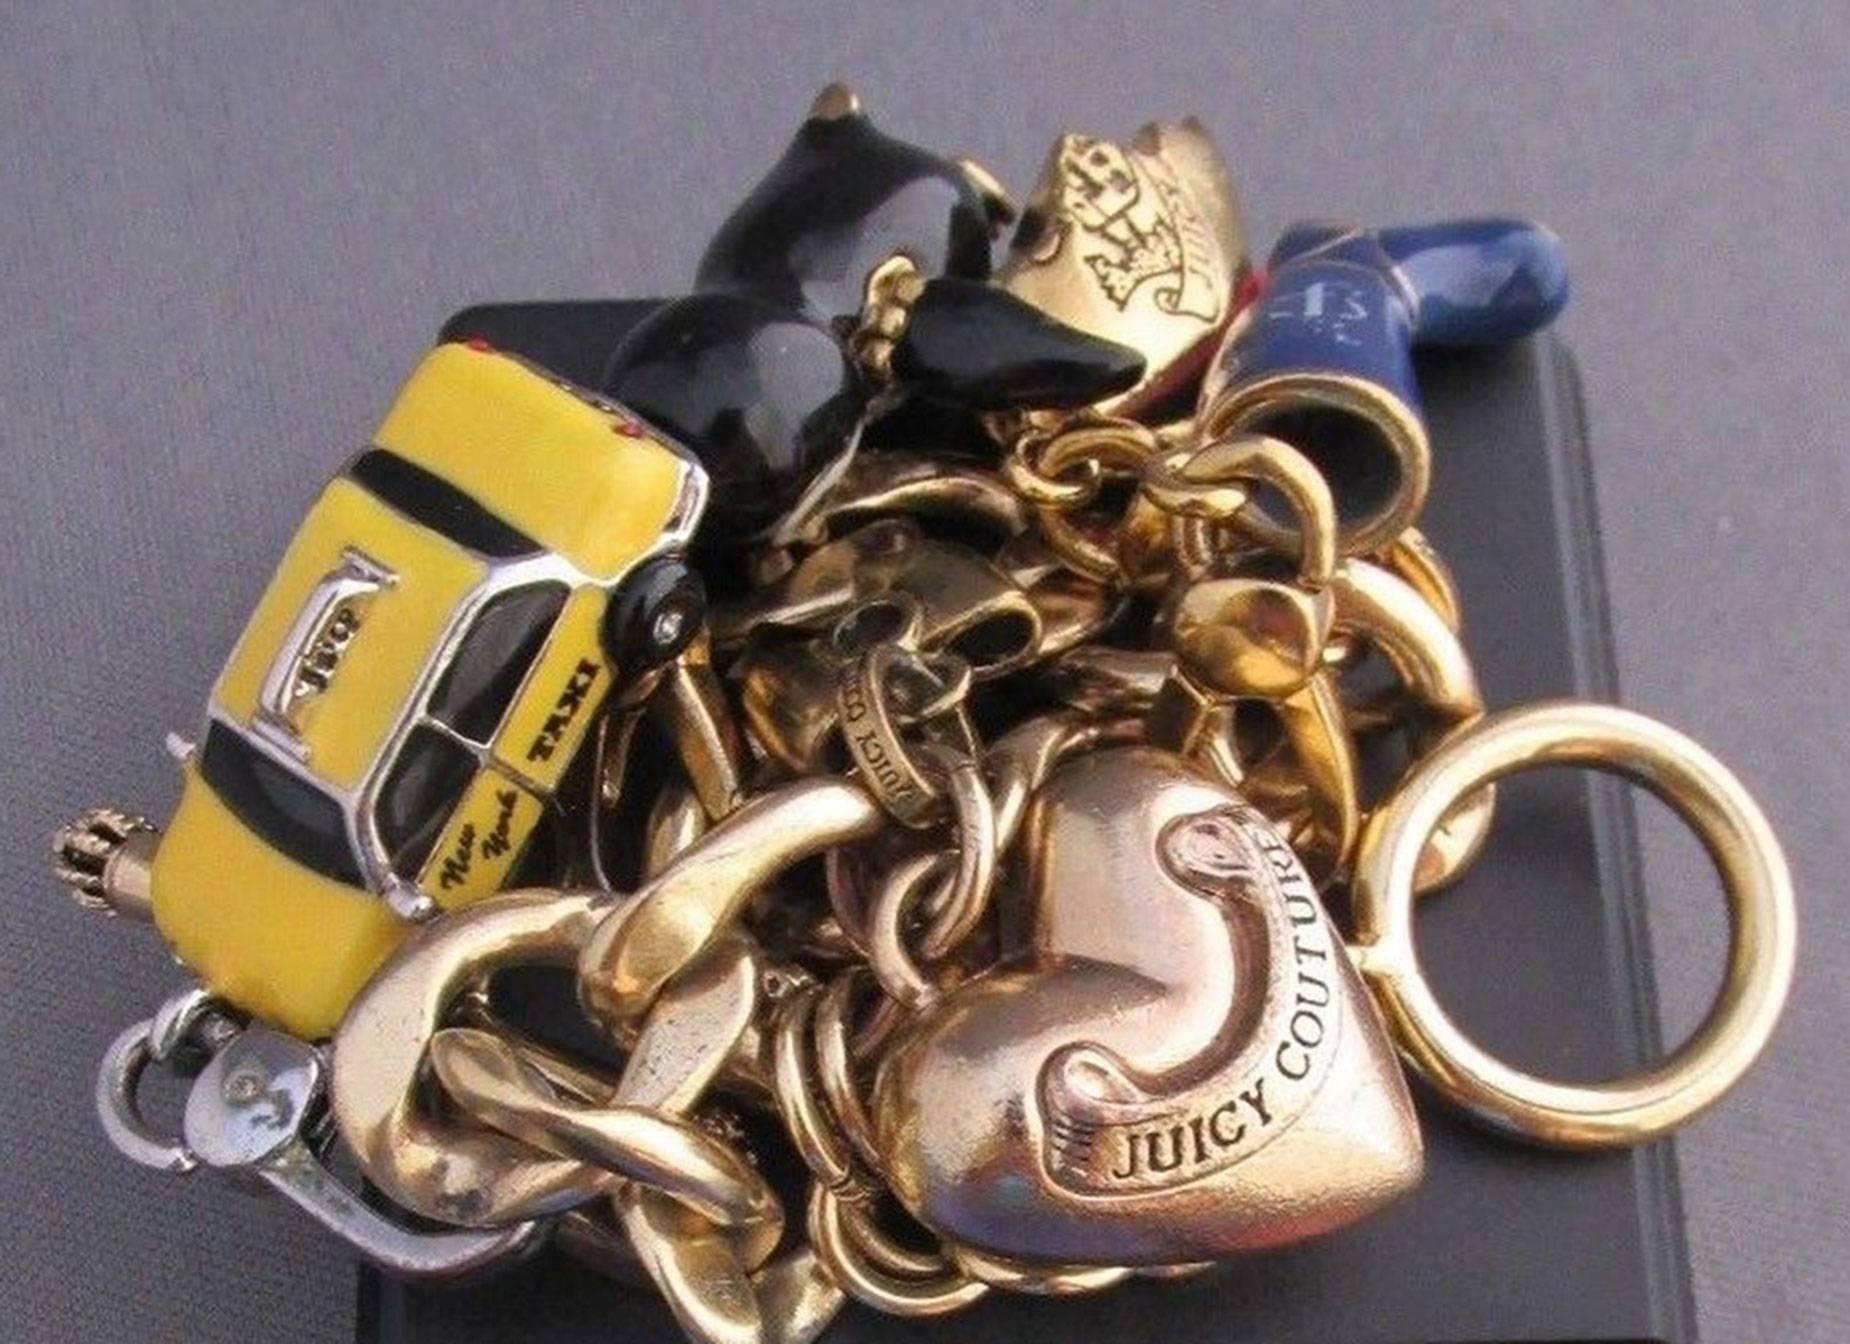 Fabulous Juicy Couture Gold Tone Link 3D Charm Bracelet suspending 5 3D Gold tone and Enamel Charms depicting an enamel Penguin, Heart, enamel Taxicab, enamel Boot and JC Emblem; approx. 8.25 inches Long. Add your own Style and Pizzazz to any